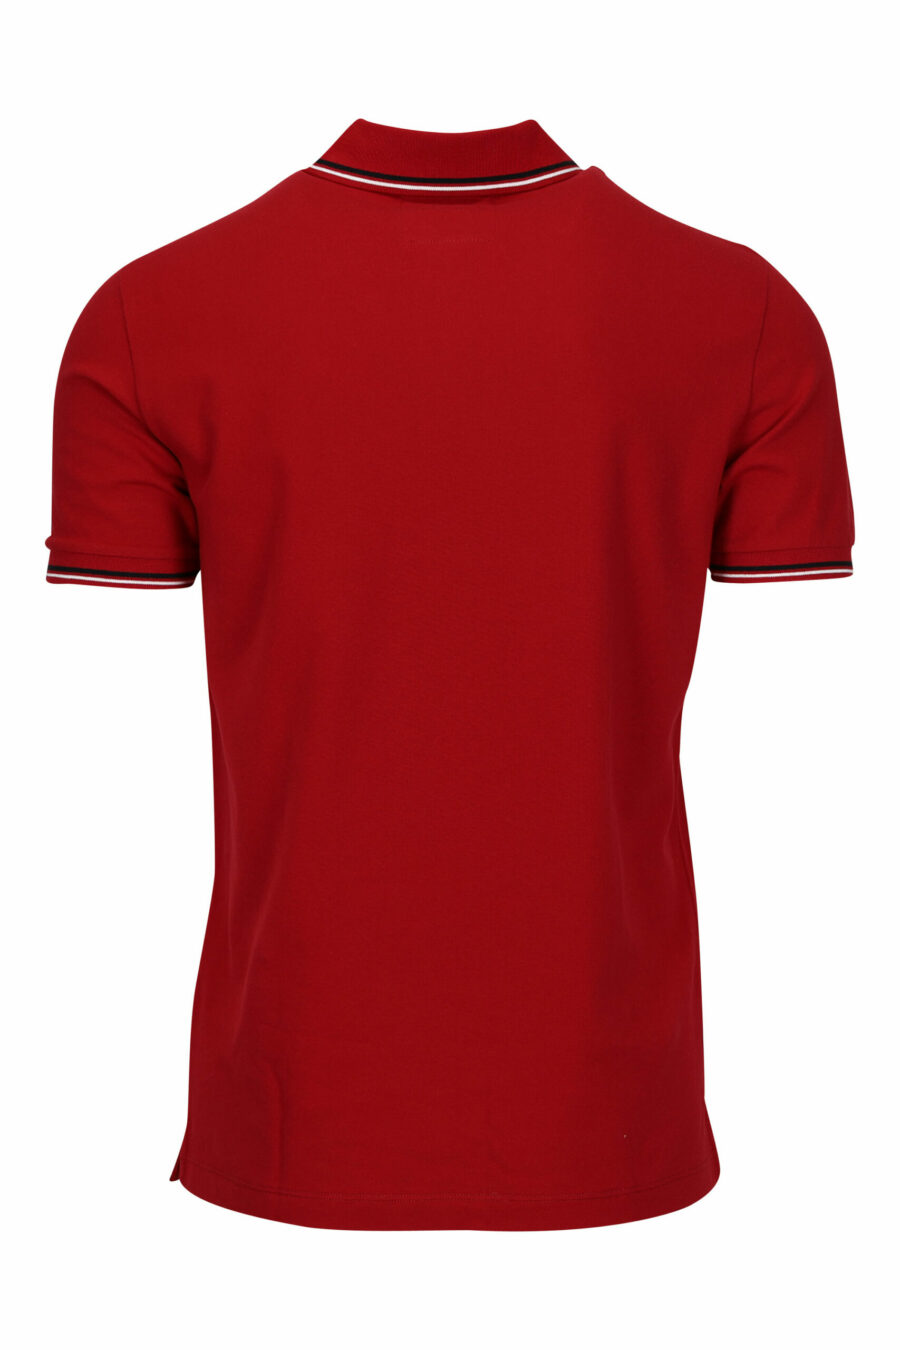 Red knitted polo shirt with striped collar and mini eagle logo - 8056861420527 1 scaled